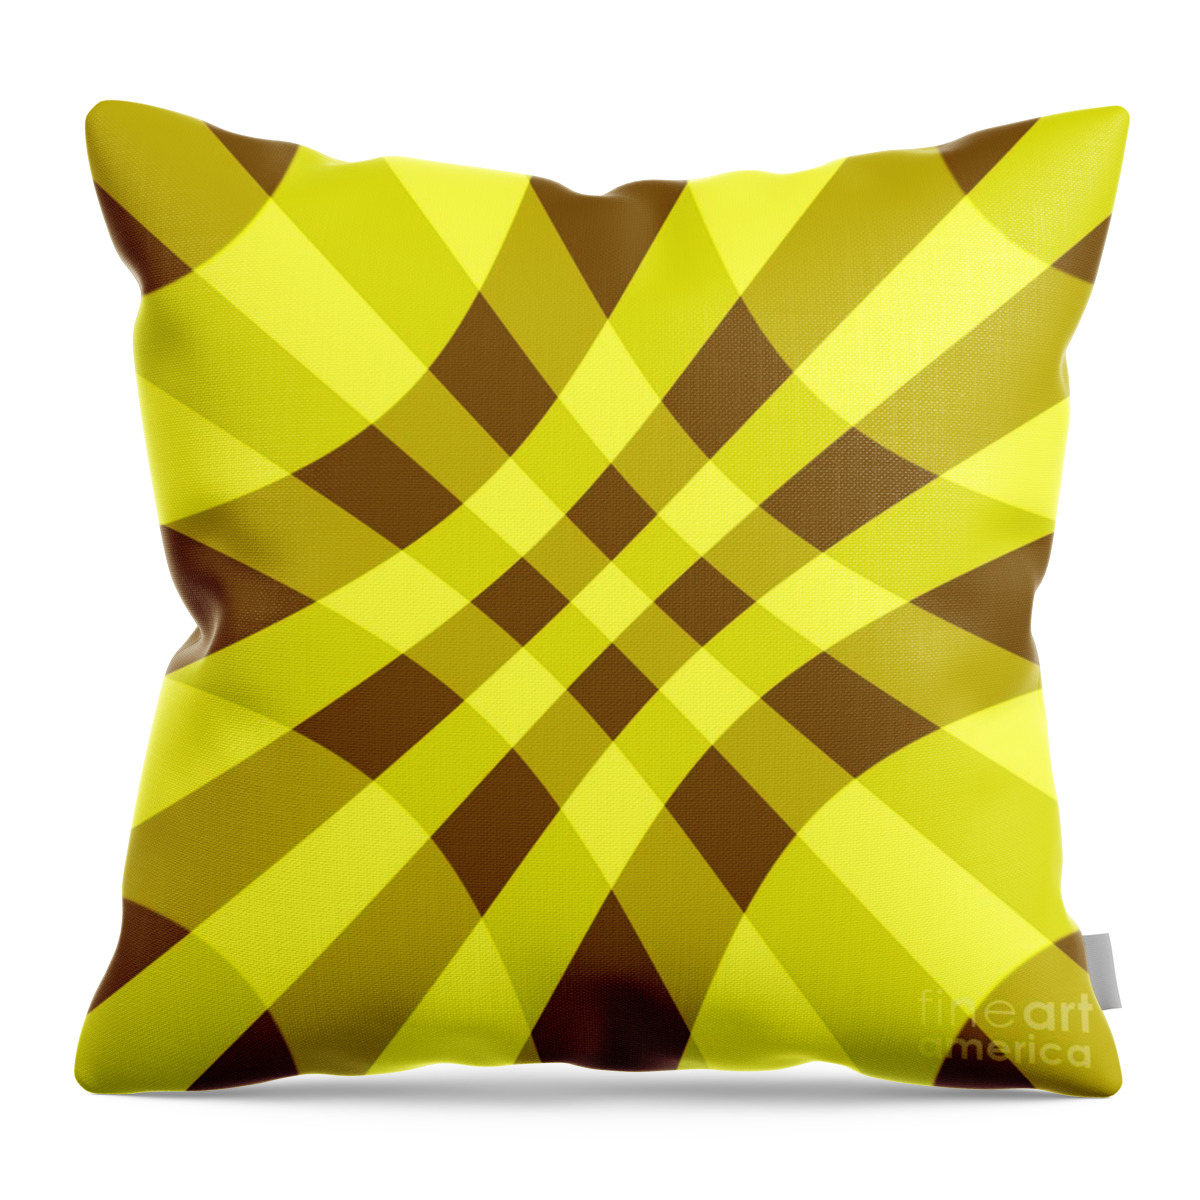 Yellow Throw Pillow featuring the digital art Yellow Brown Crosshatch by Delynn Addams for Home Decor by Delynn Addams